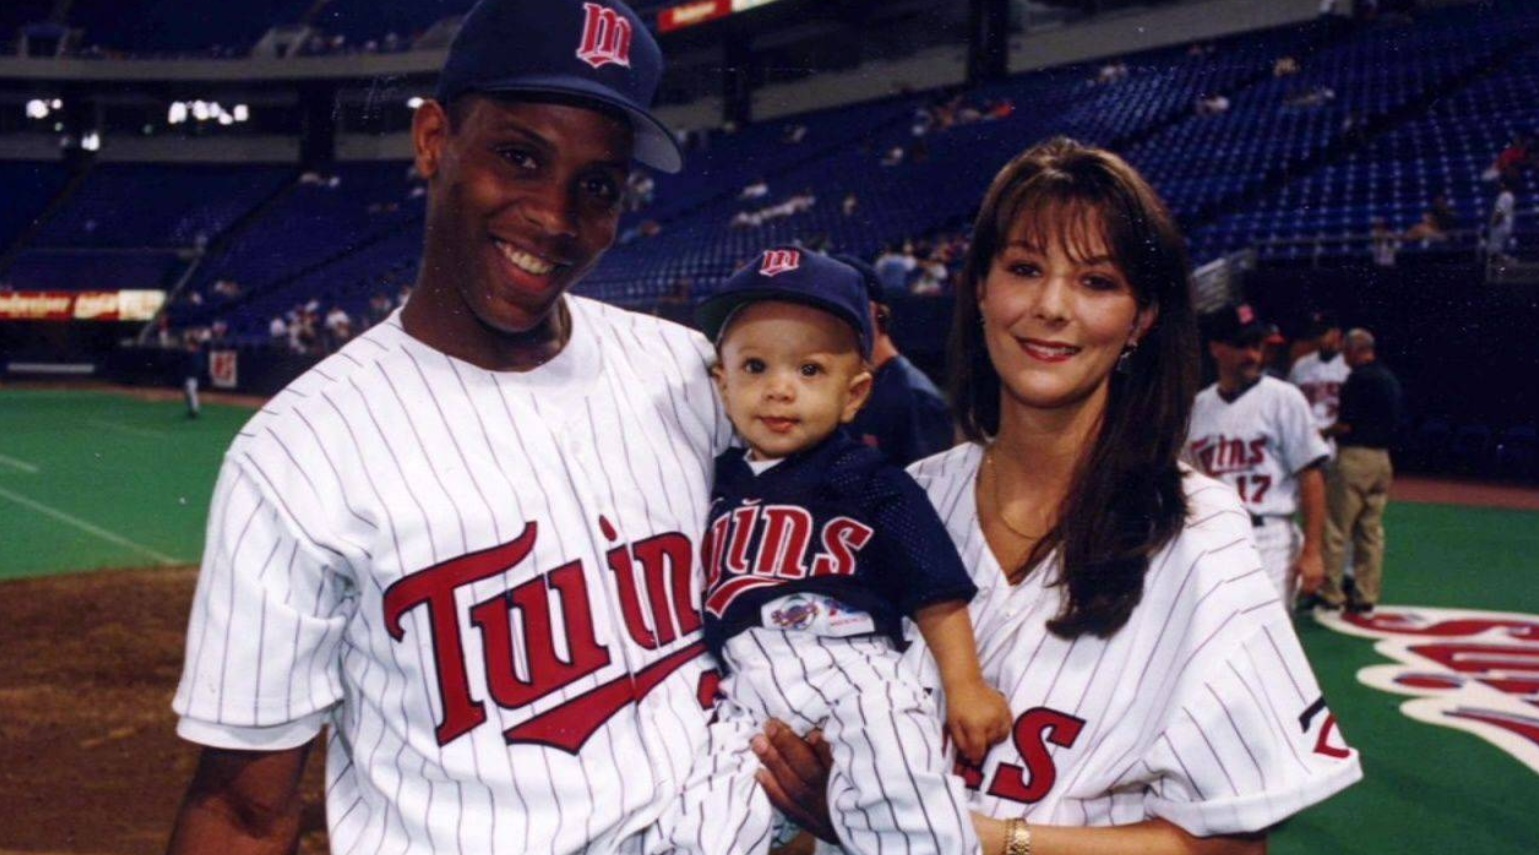 PHOTO Patrick Mahomes As A Toddler In A Full Minnesota Twins Outfit